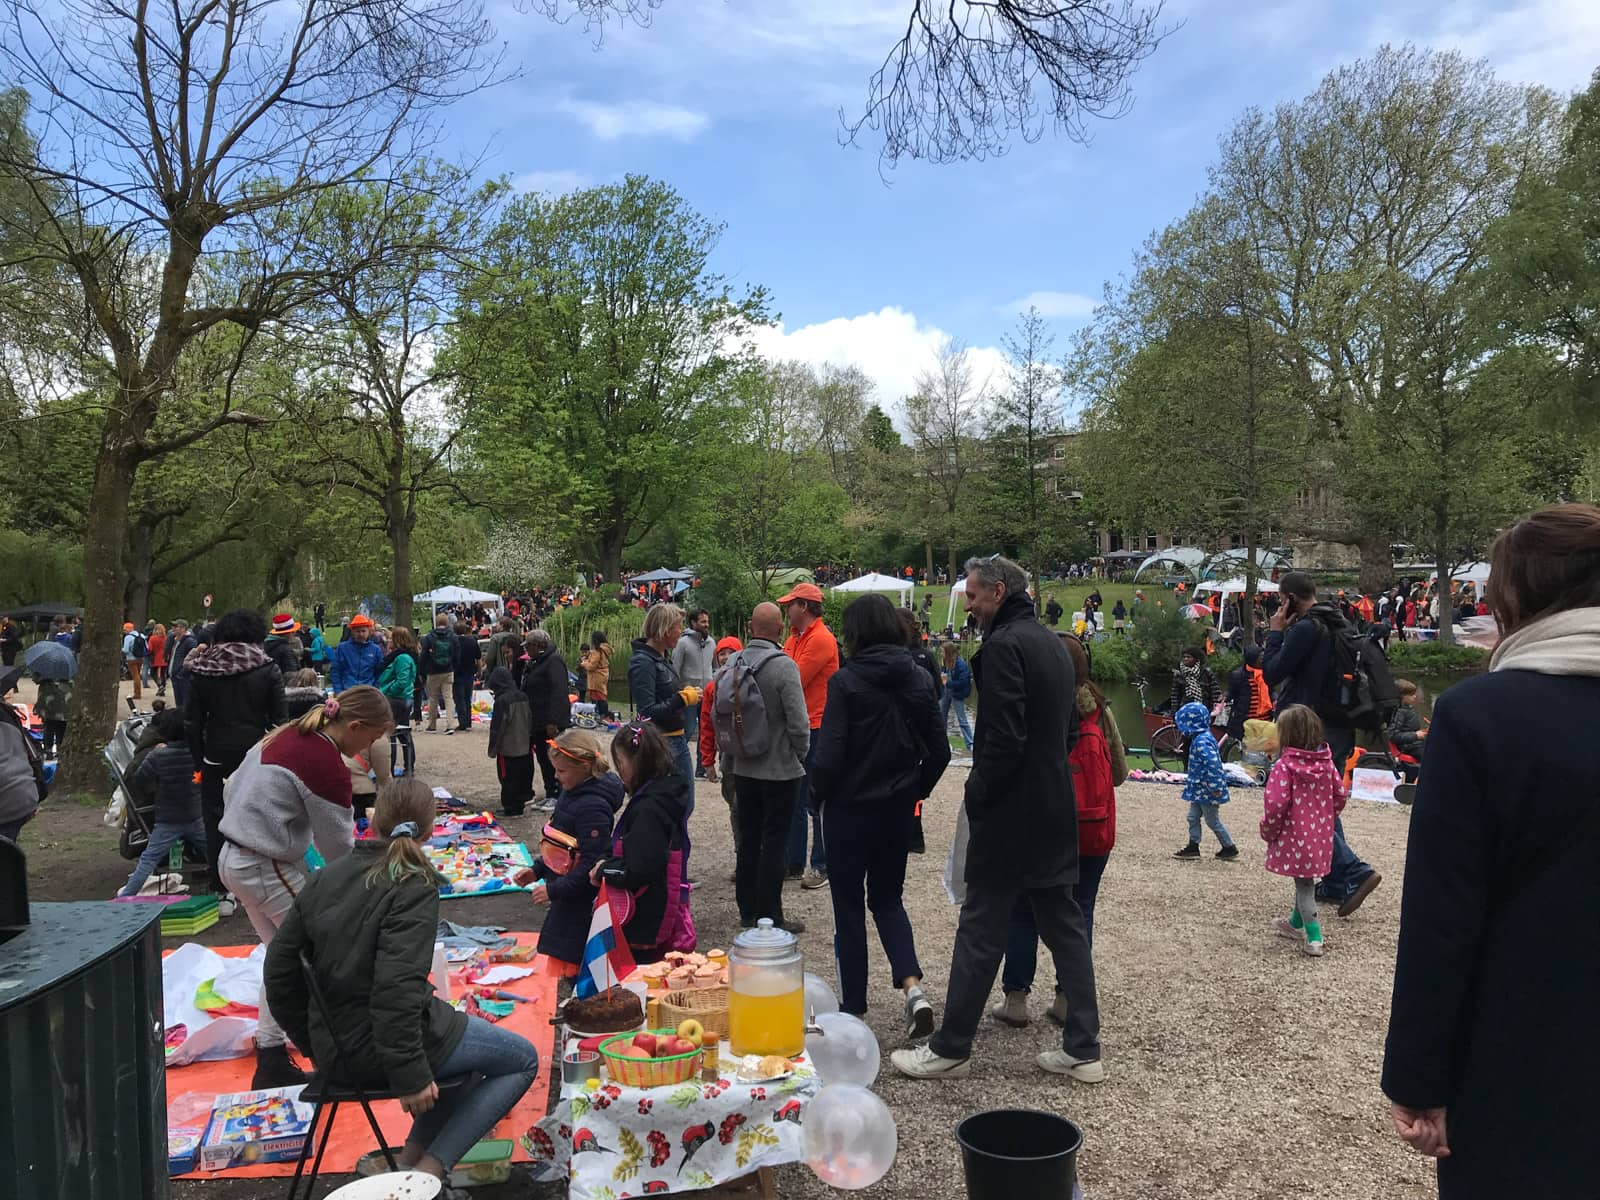 The entrance of a small park that is busy with people, some selling second hand goods and toys in stalls on the sides of the path